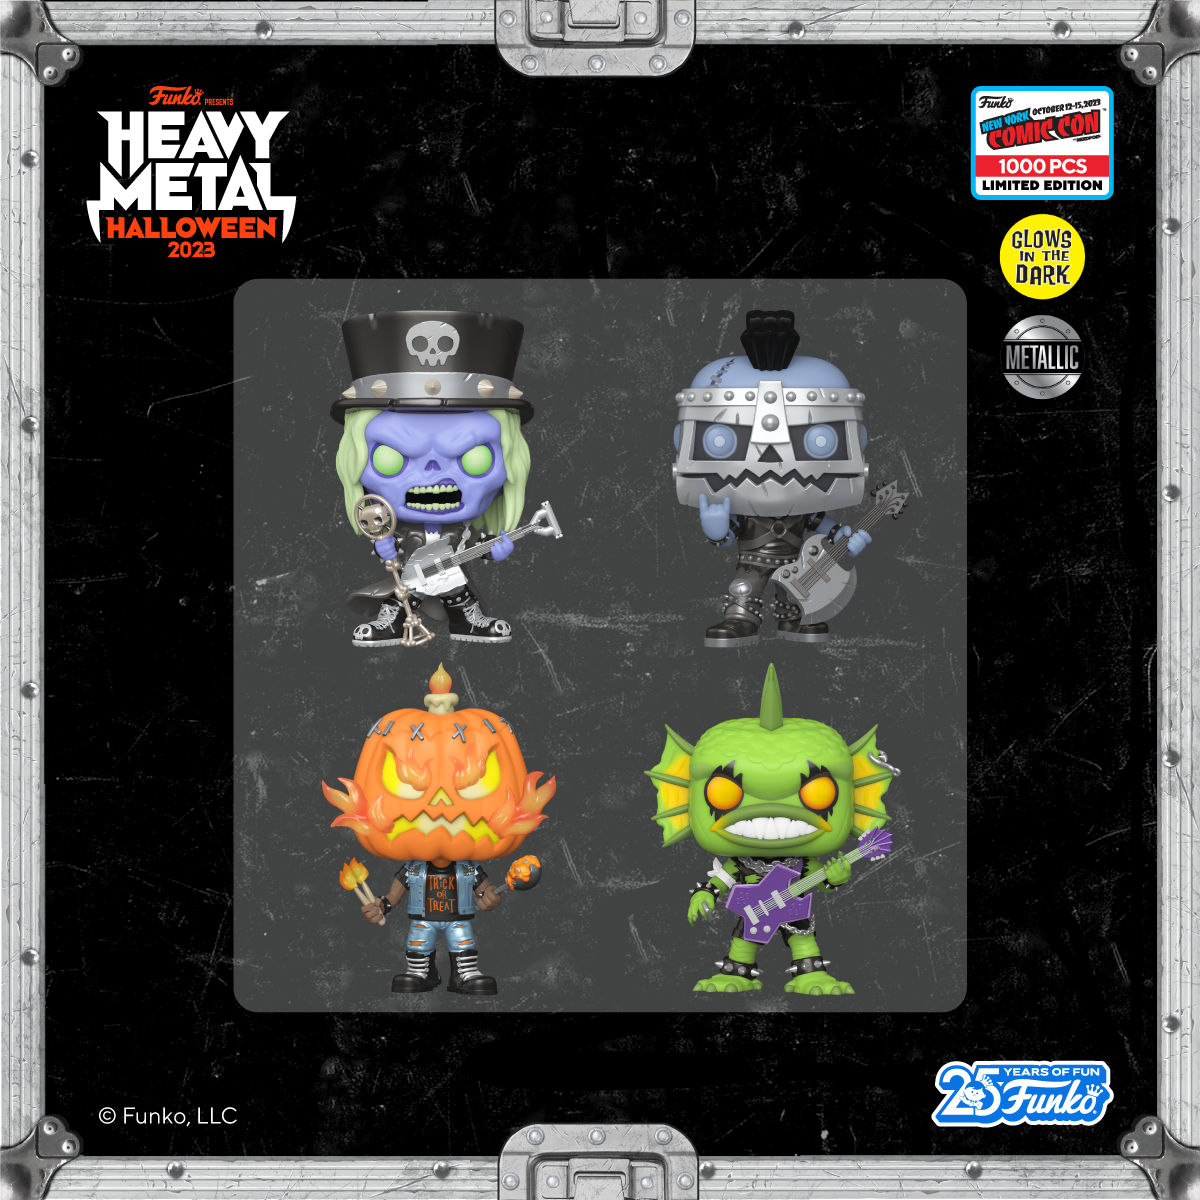 Rock the night away with our next set! Our Heavy Metal Halloween mascots join the lineup of exclusive NYCC 2023 collectibles. 